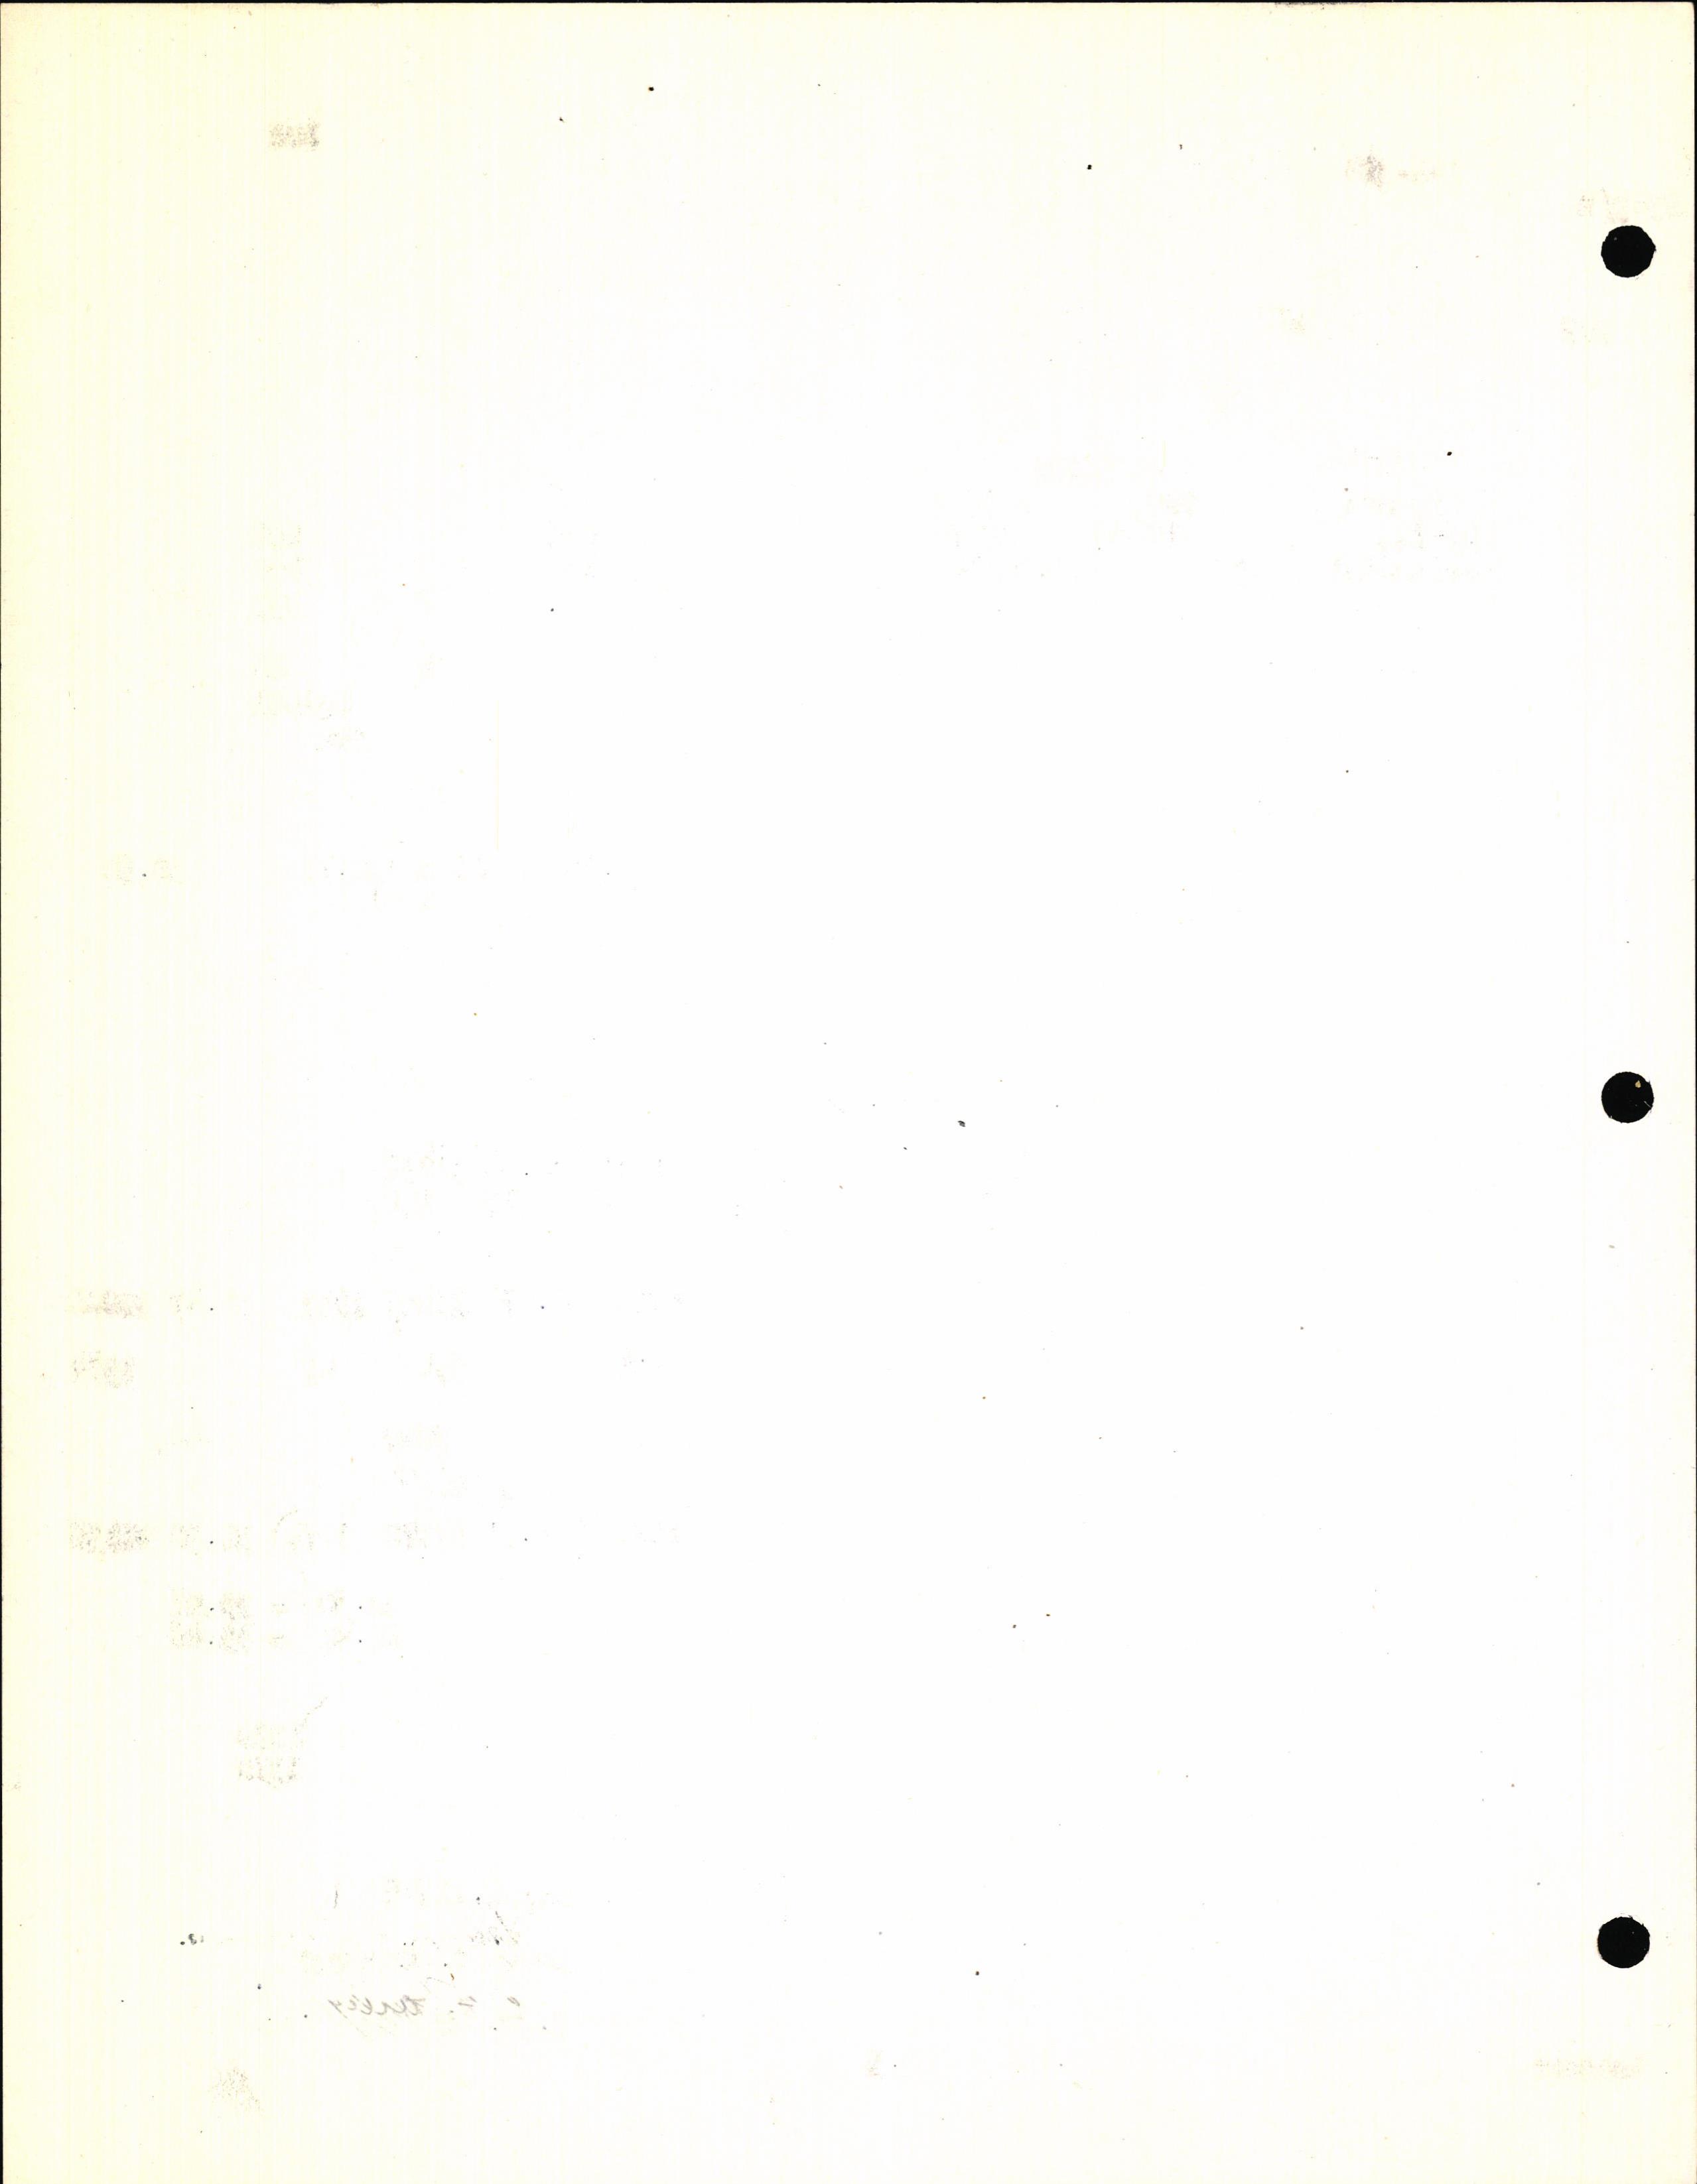 Sample page 10 from AirCorps Library document: Technical Information for Serial Number 102